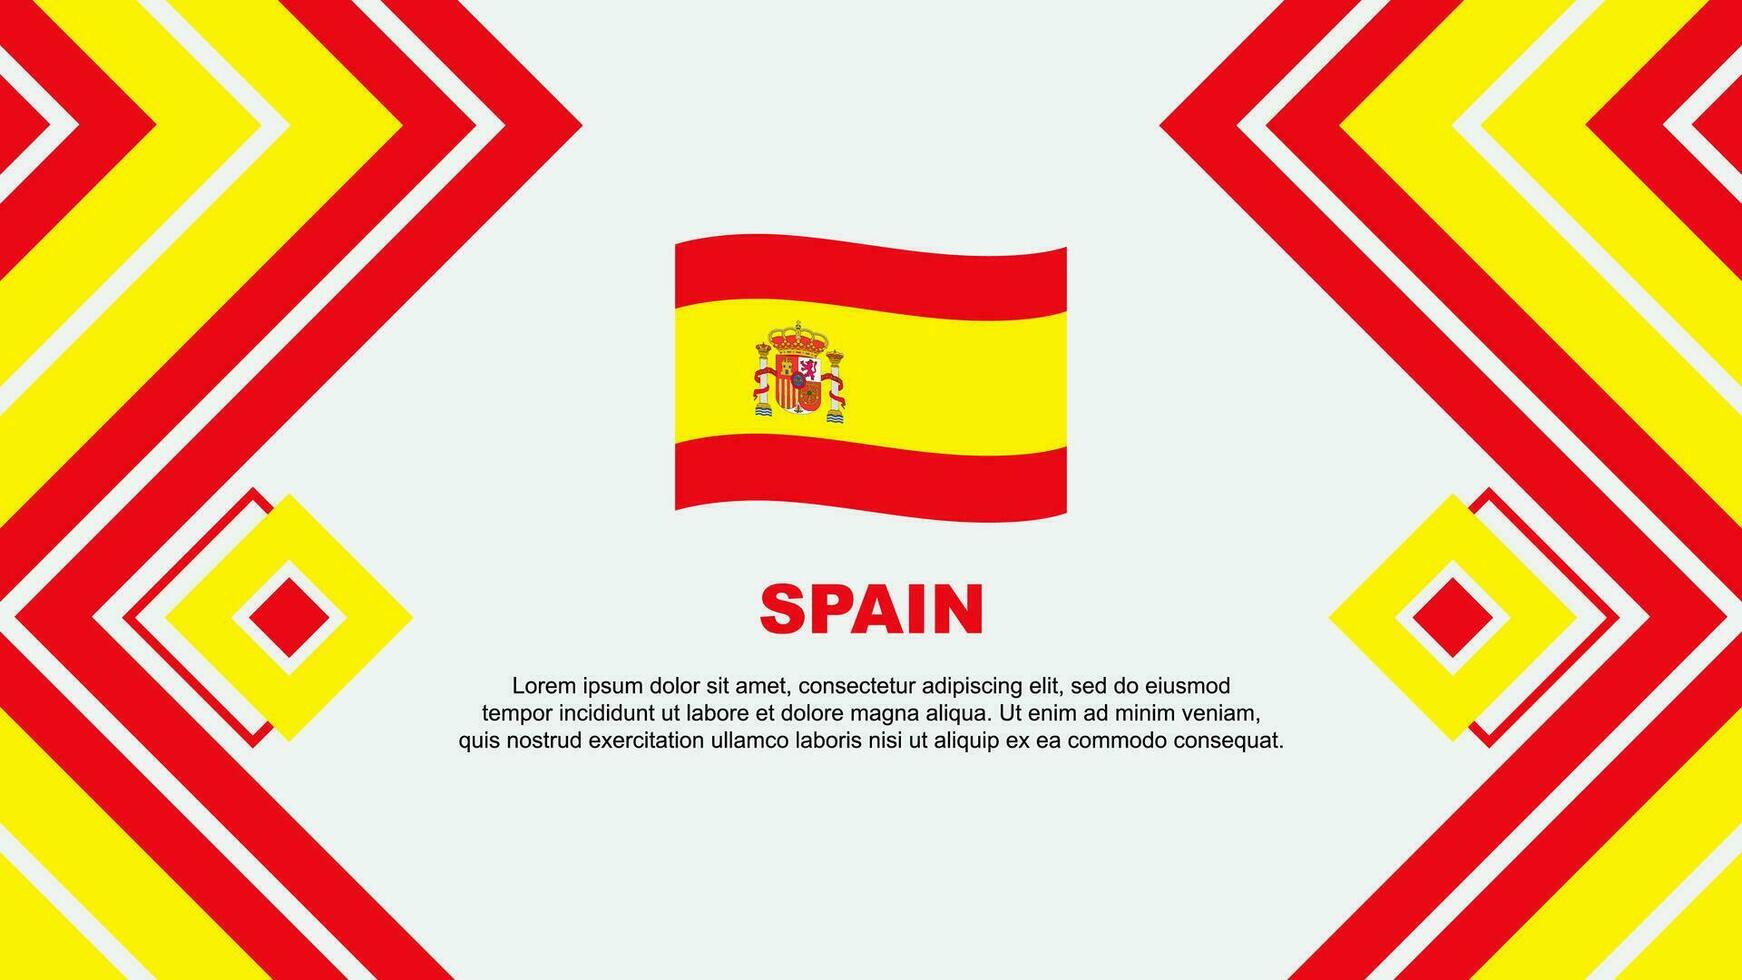 Spain Flag Abstract Background Design Template. Spain Independence Day Banner Wallpaper Vector Illustration. Spain Design